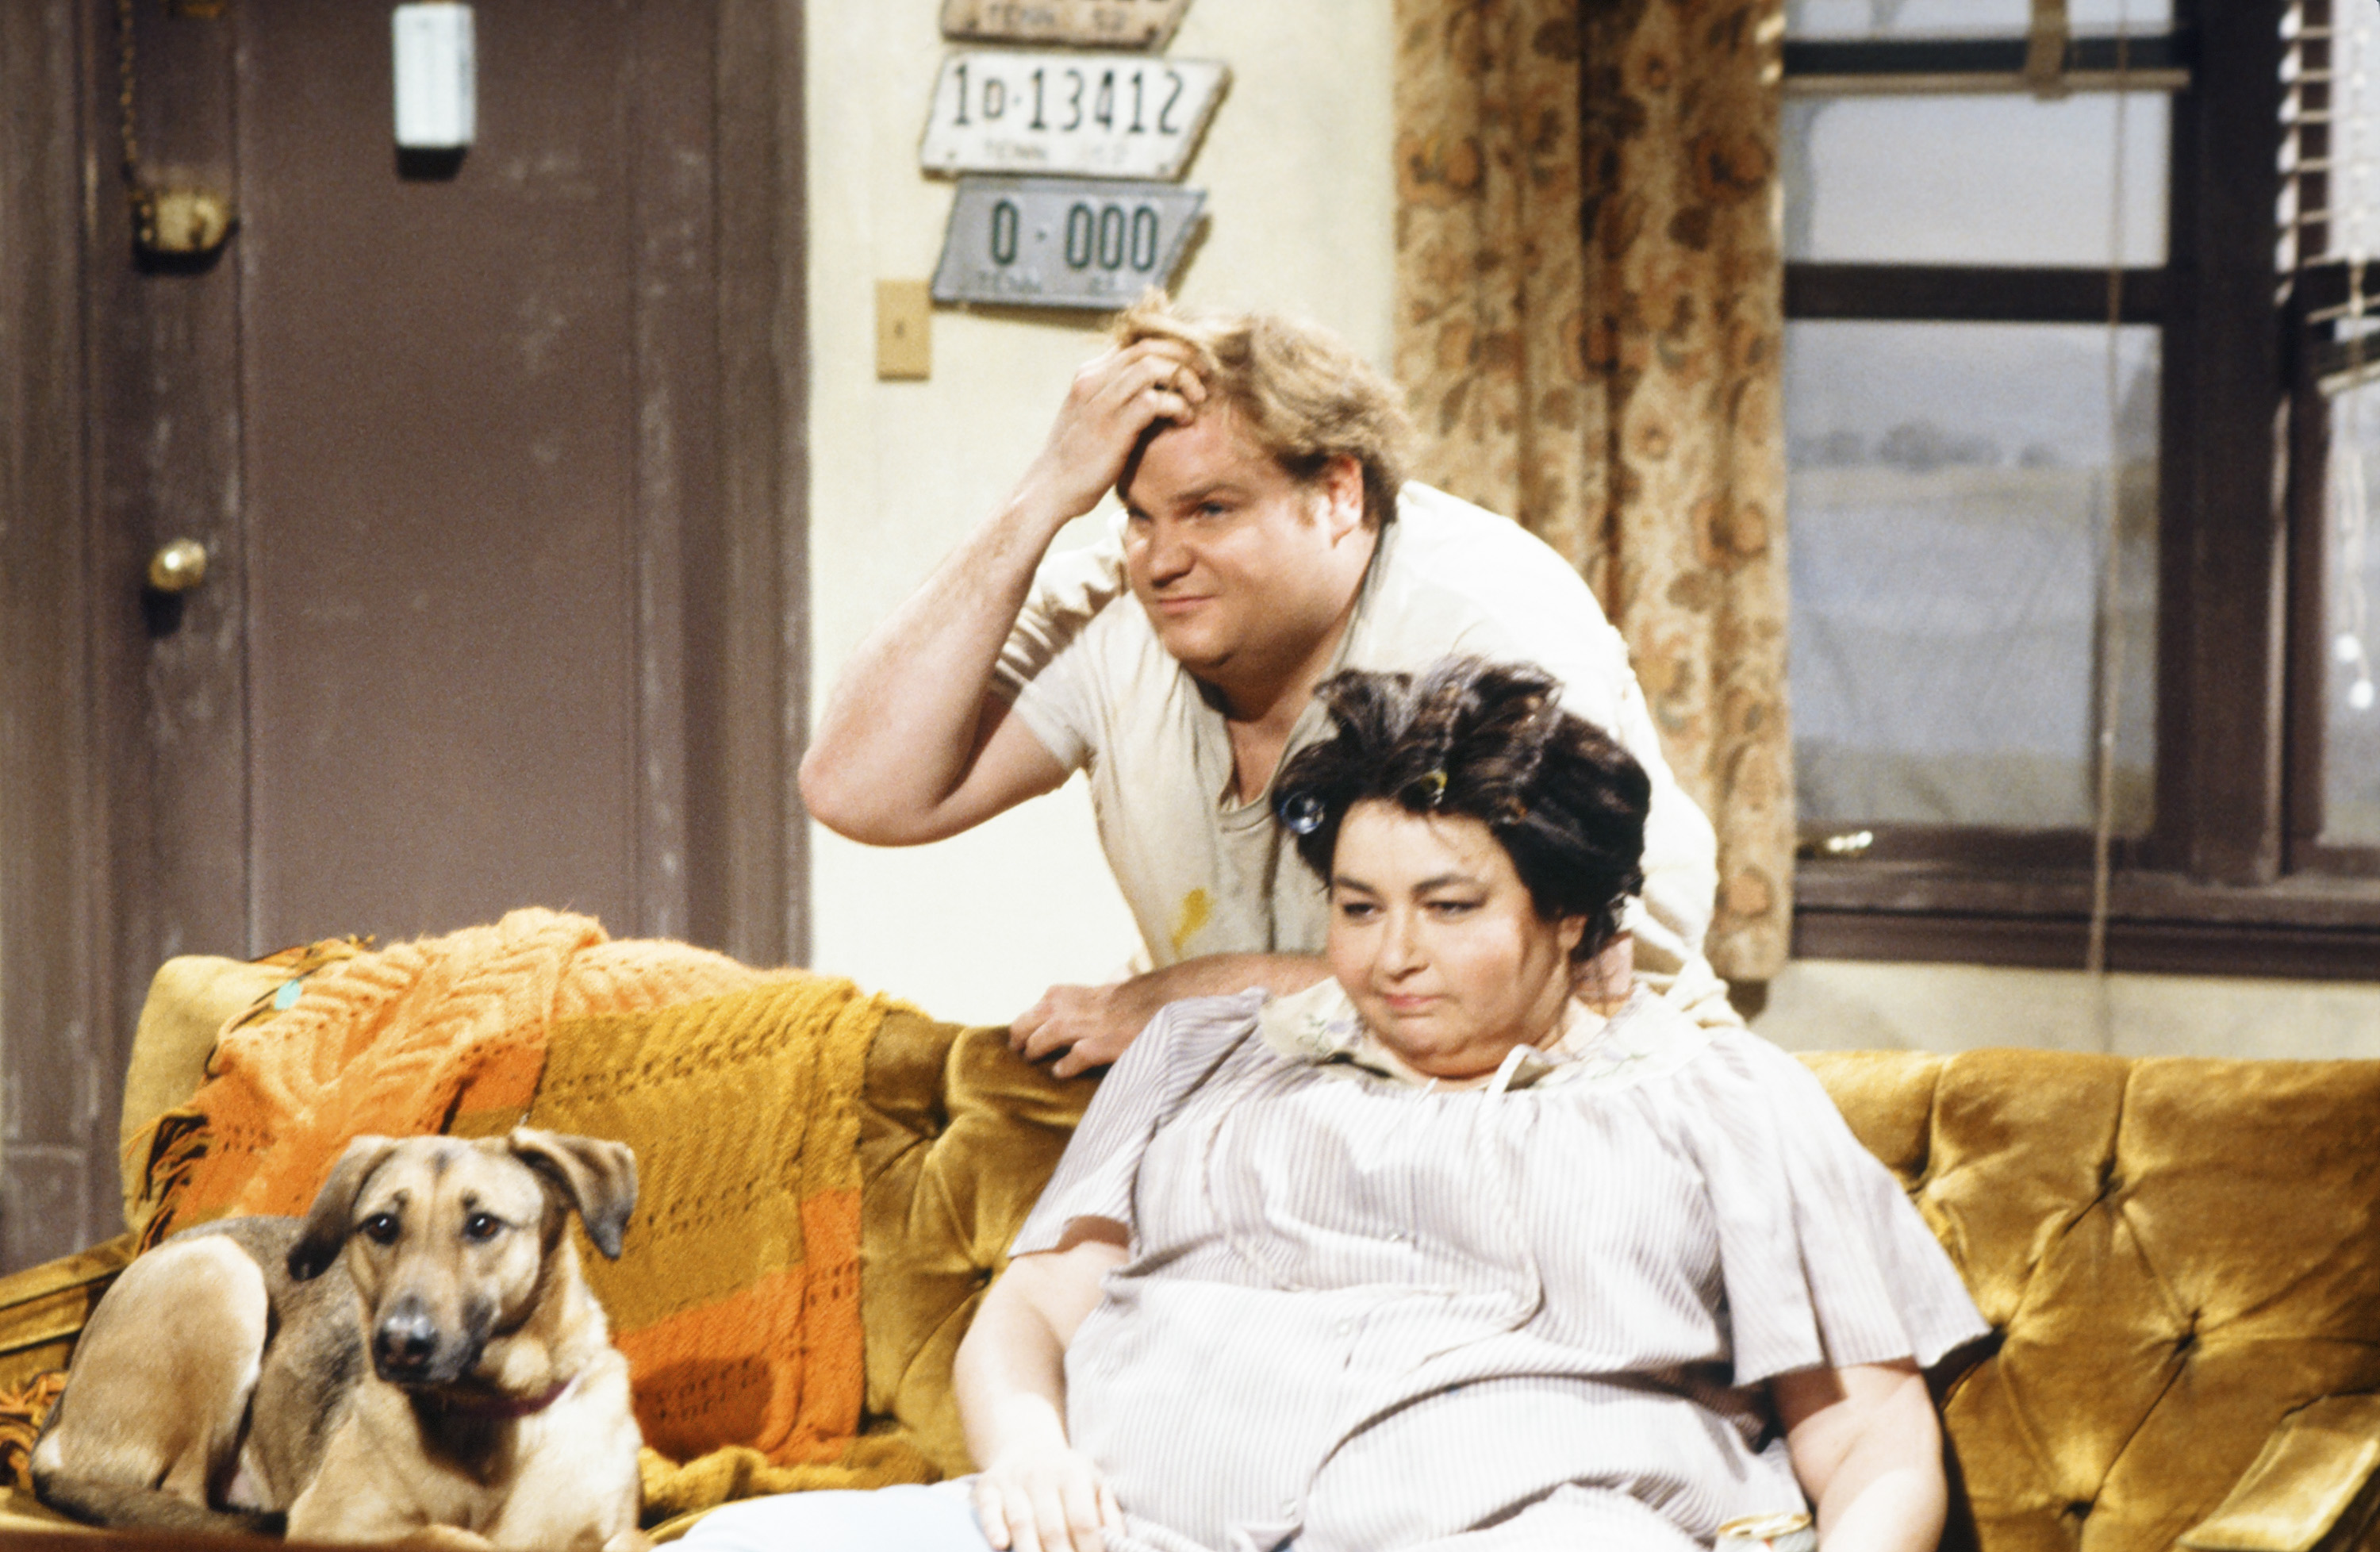 Chris Farley and Roseanne Barr during "White Trash History Minute" skit on February 16, 1991 | Source: Getty Images 